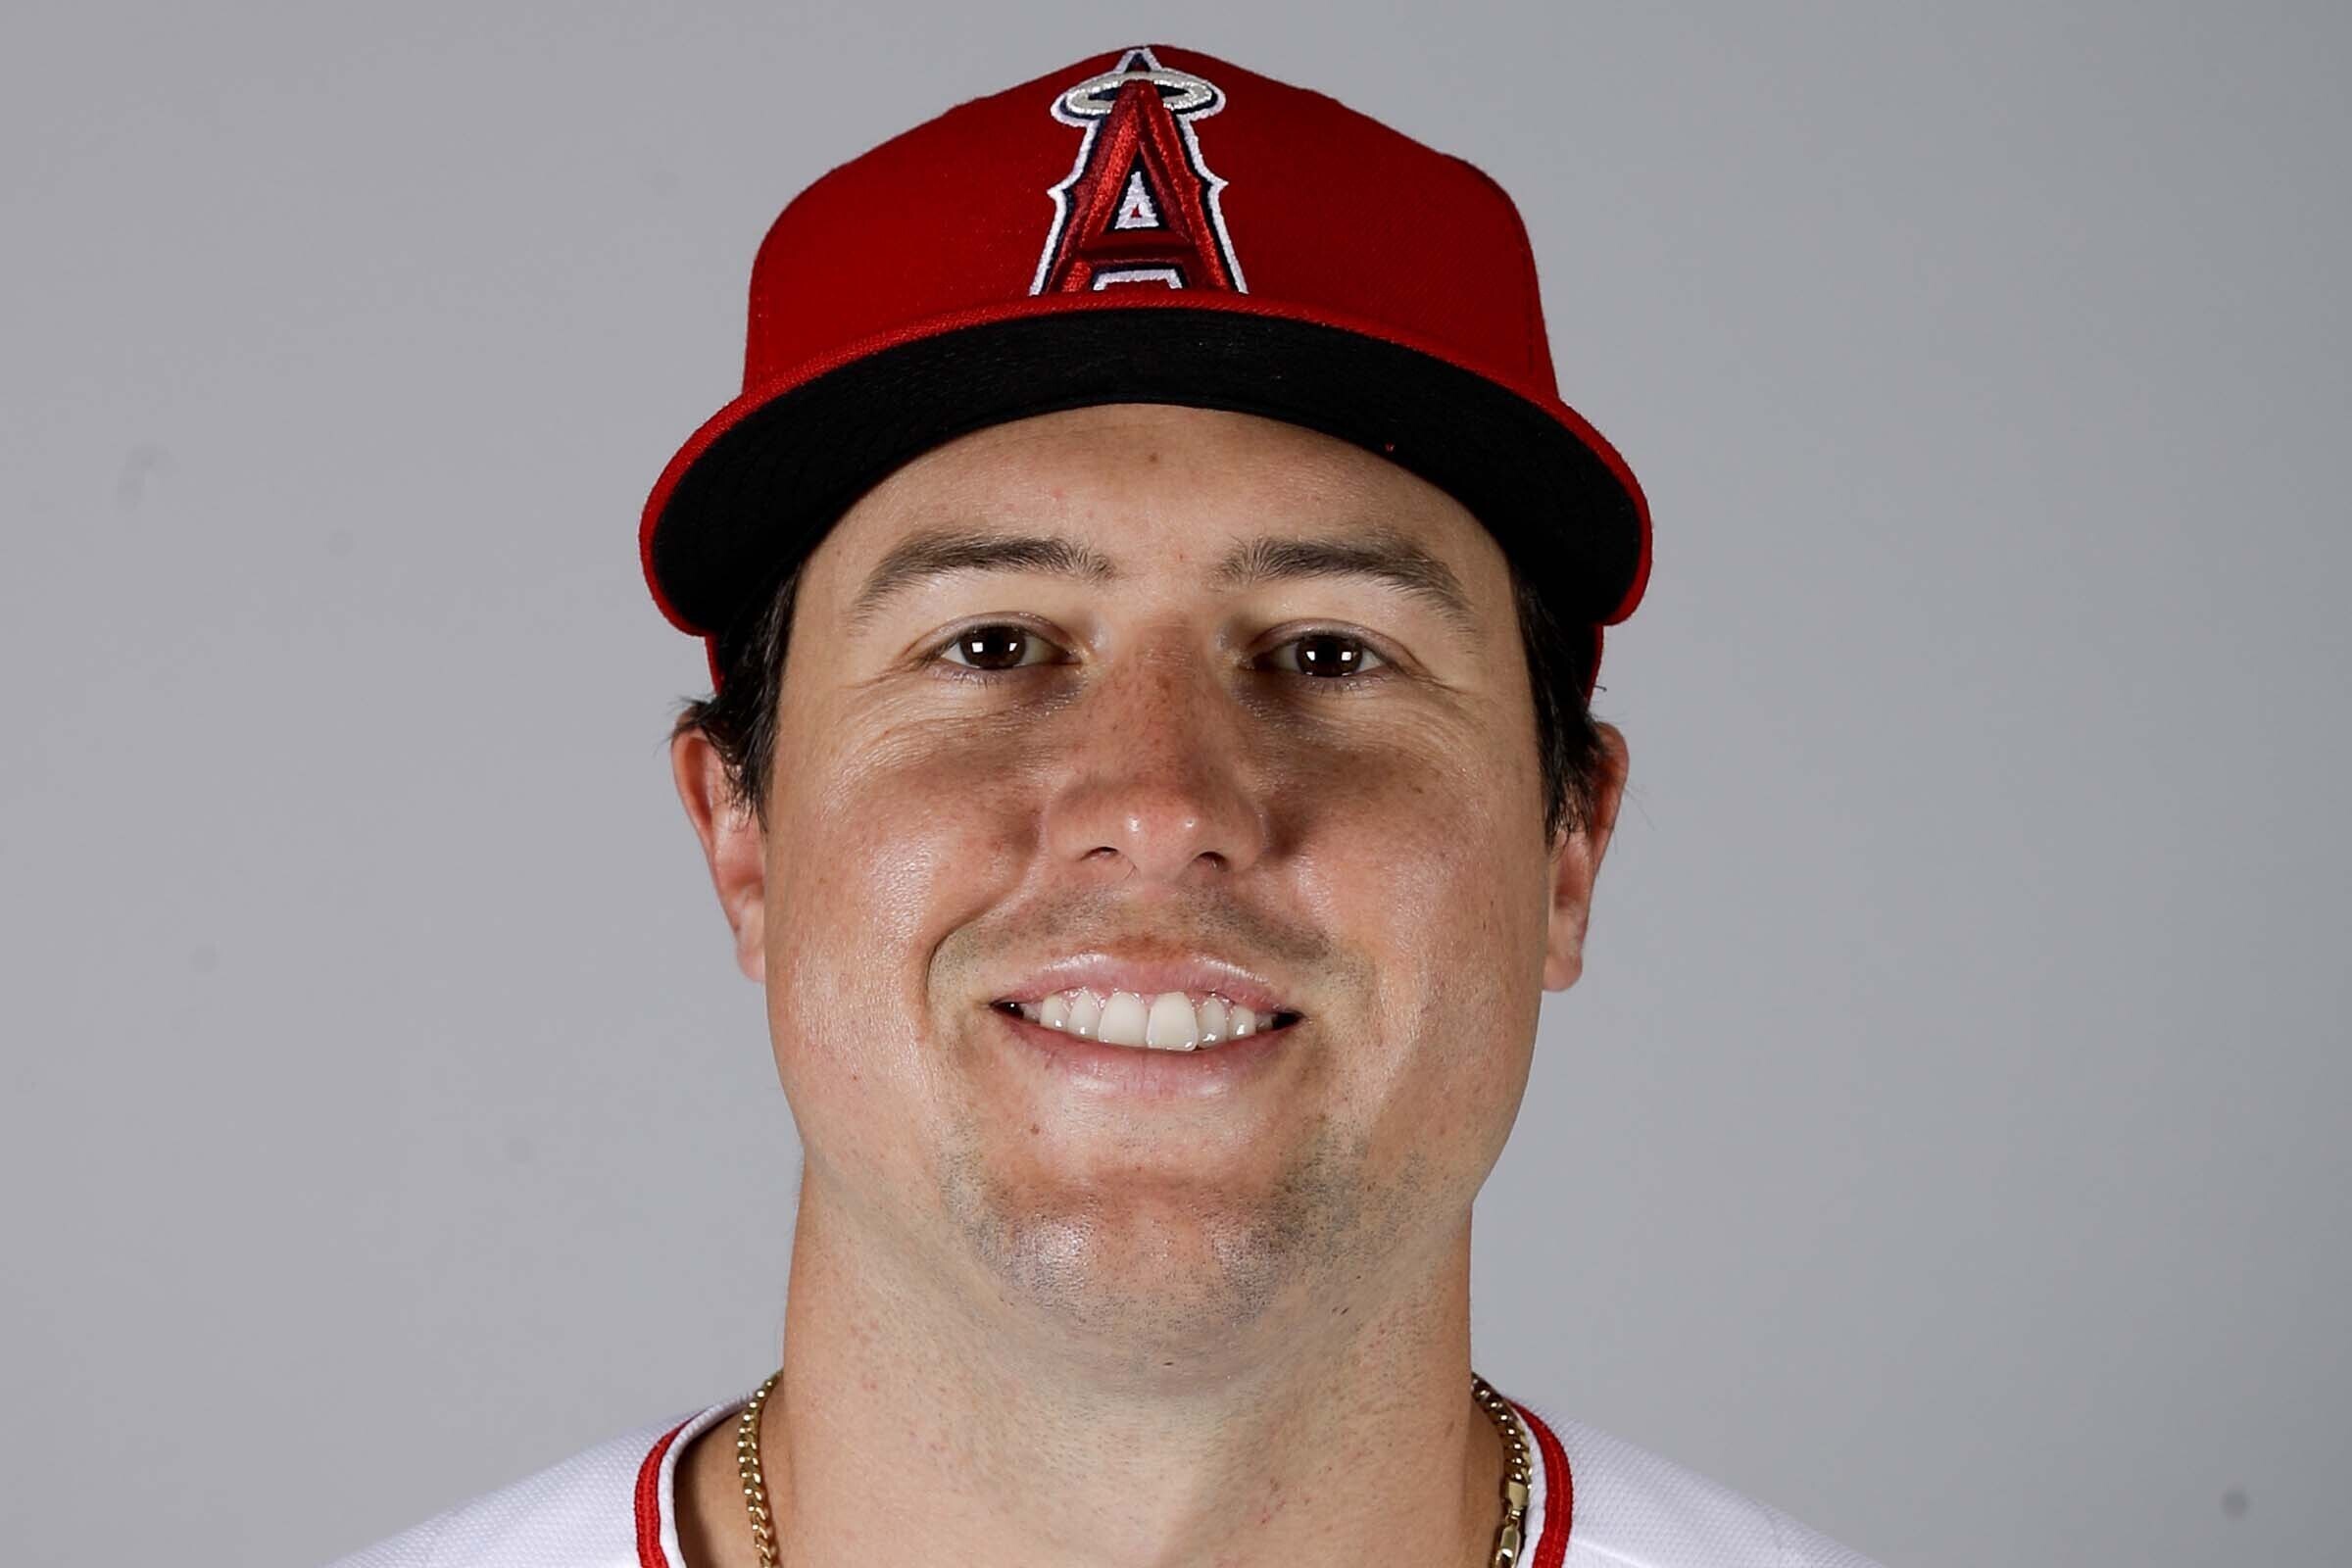 Tyler Skaggs died of a deadly mix of fentanyl, oxycodone and alcohol